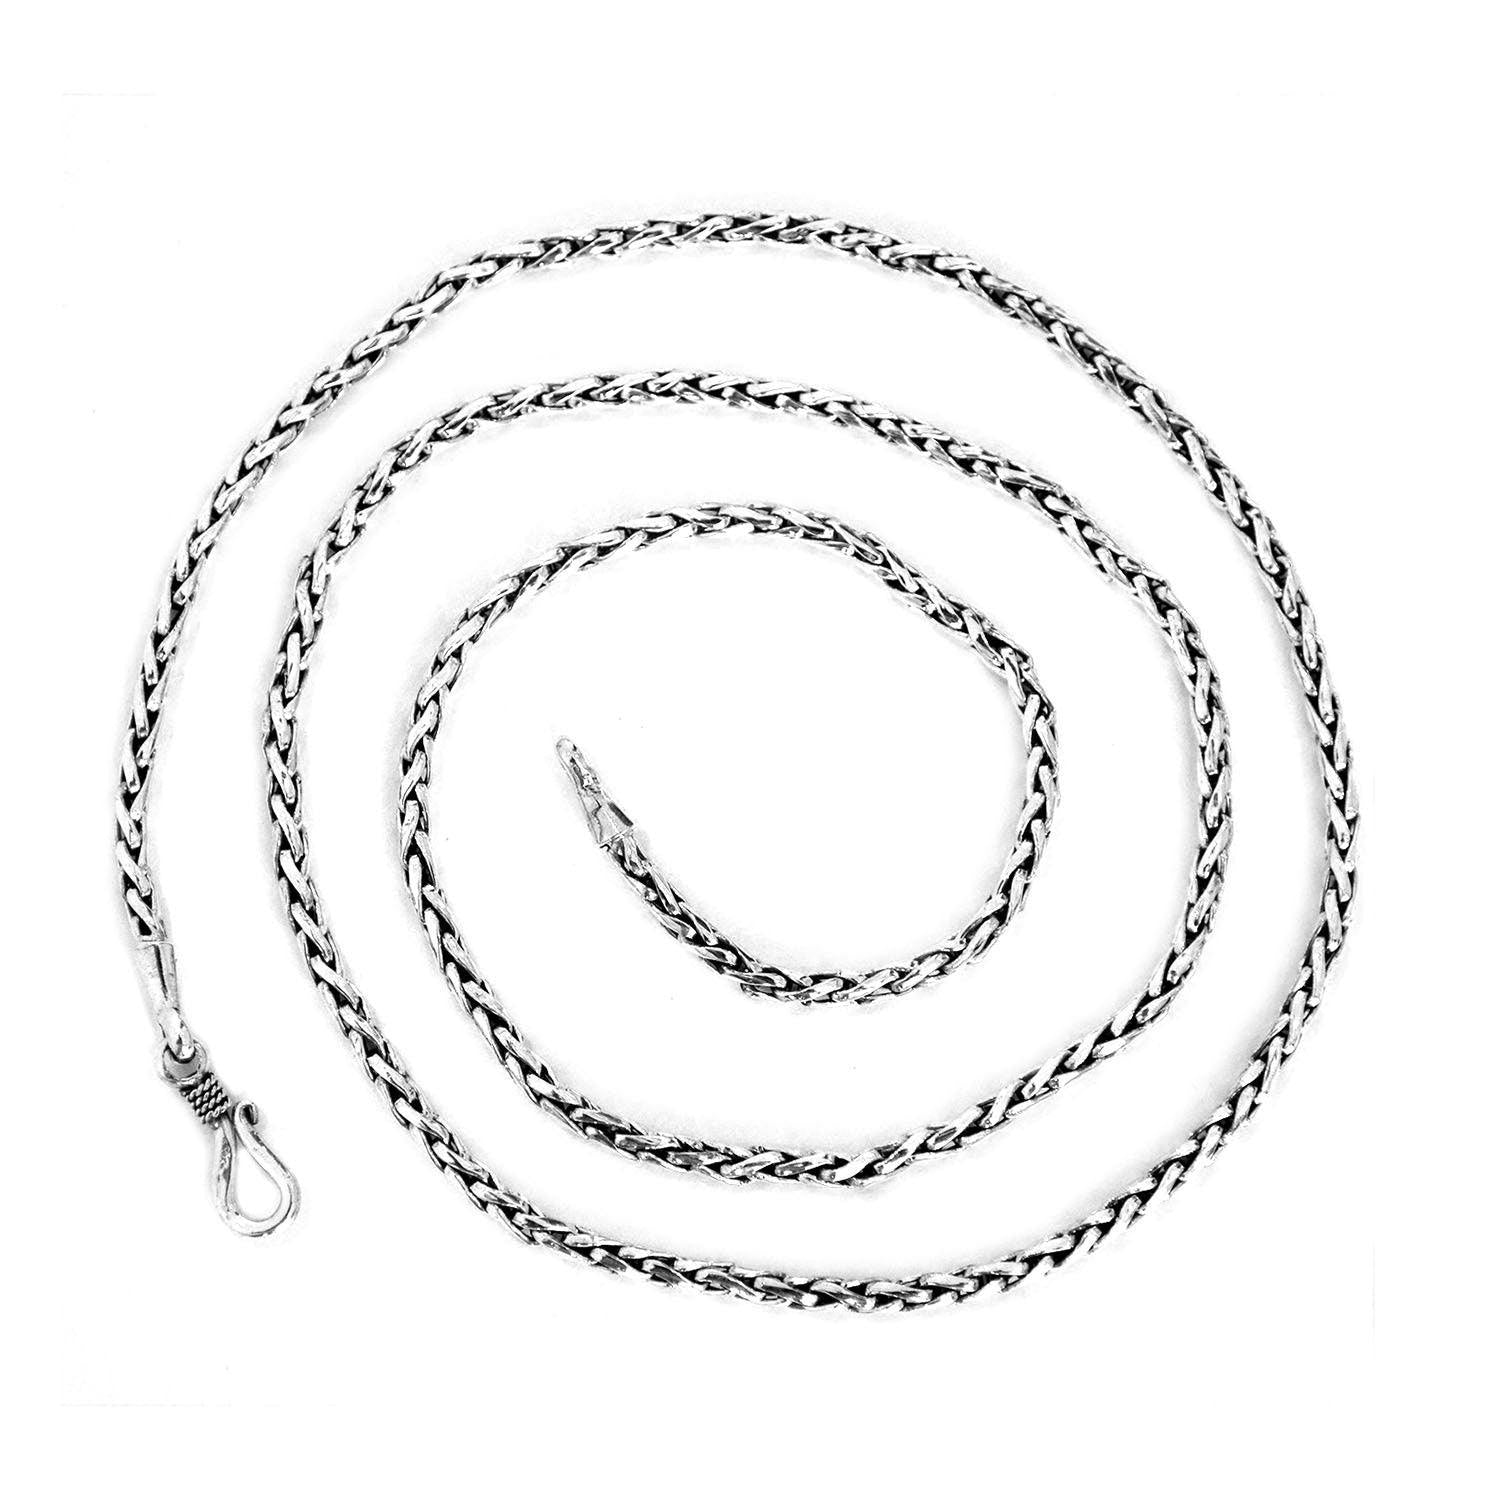 Bali WHEAT Chain Necklace in 925 Sterling Silver Handmade 2.5 mm Byzantine - Inspiring Jewellery